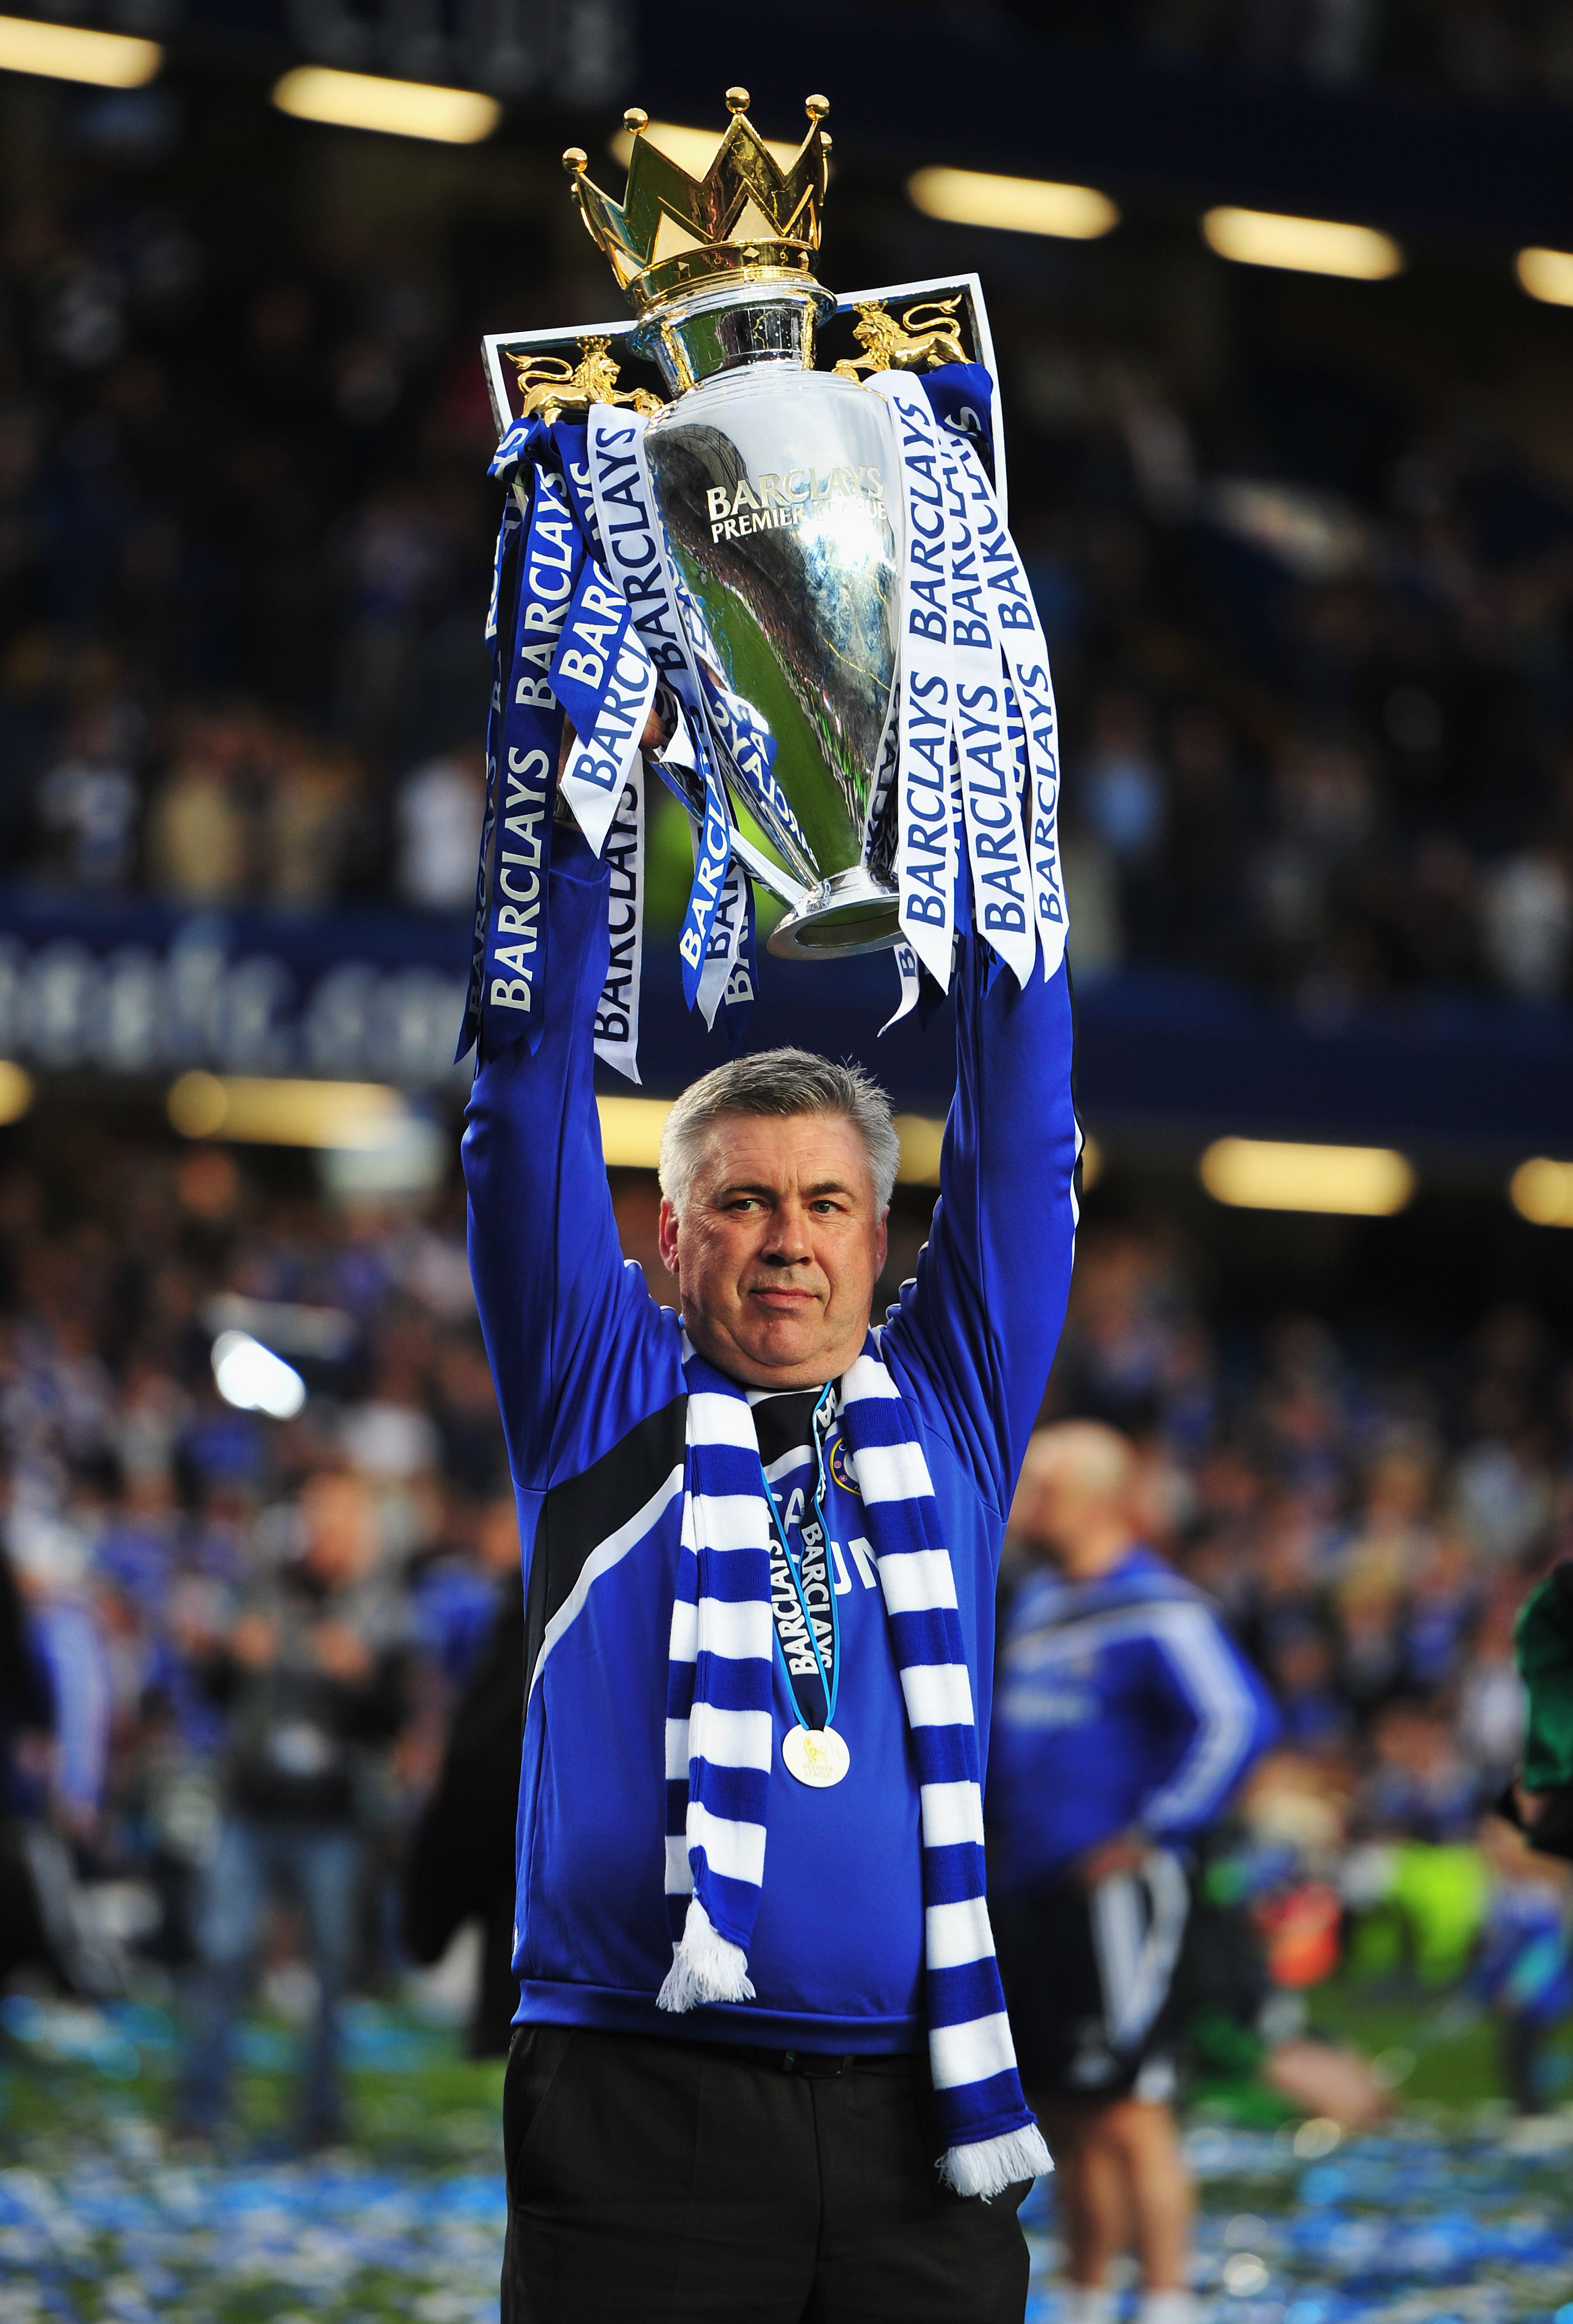 LONDON, ENGLAND - MAY 09:  Carlo Ancelotti manager of Chelsea celebrates with the trophy as they win the title after the Barclays Premier League match between Chelsea and Wigan Athletic at Stamford Bridge on May 9, 2010 in London, England. Chelsea won 8-0